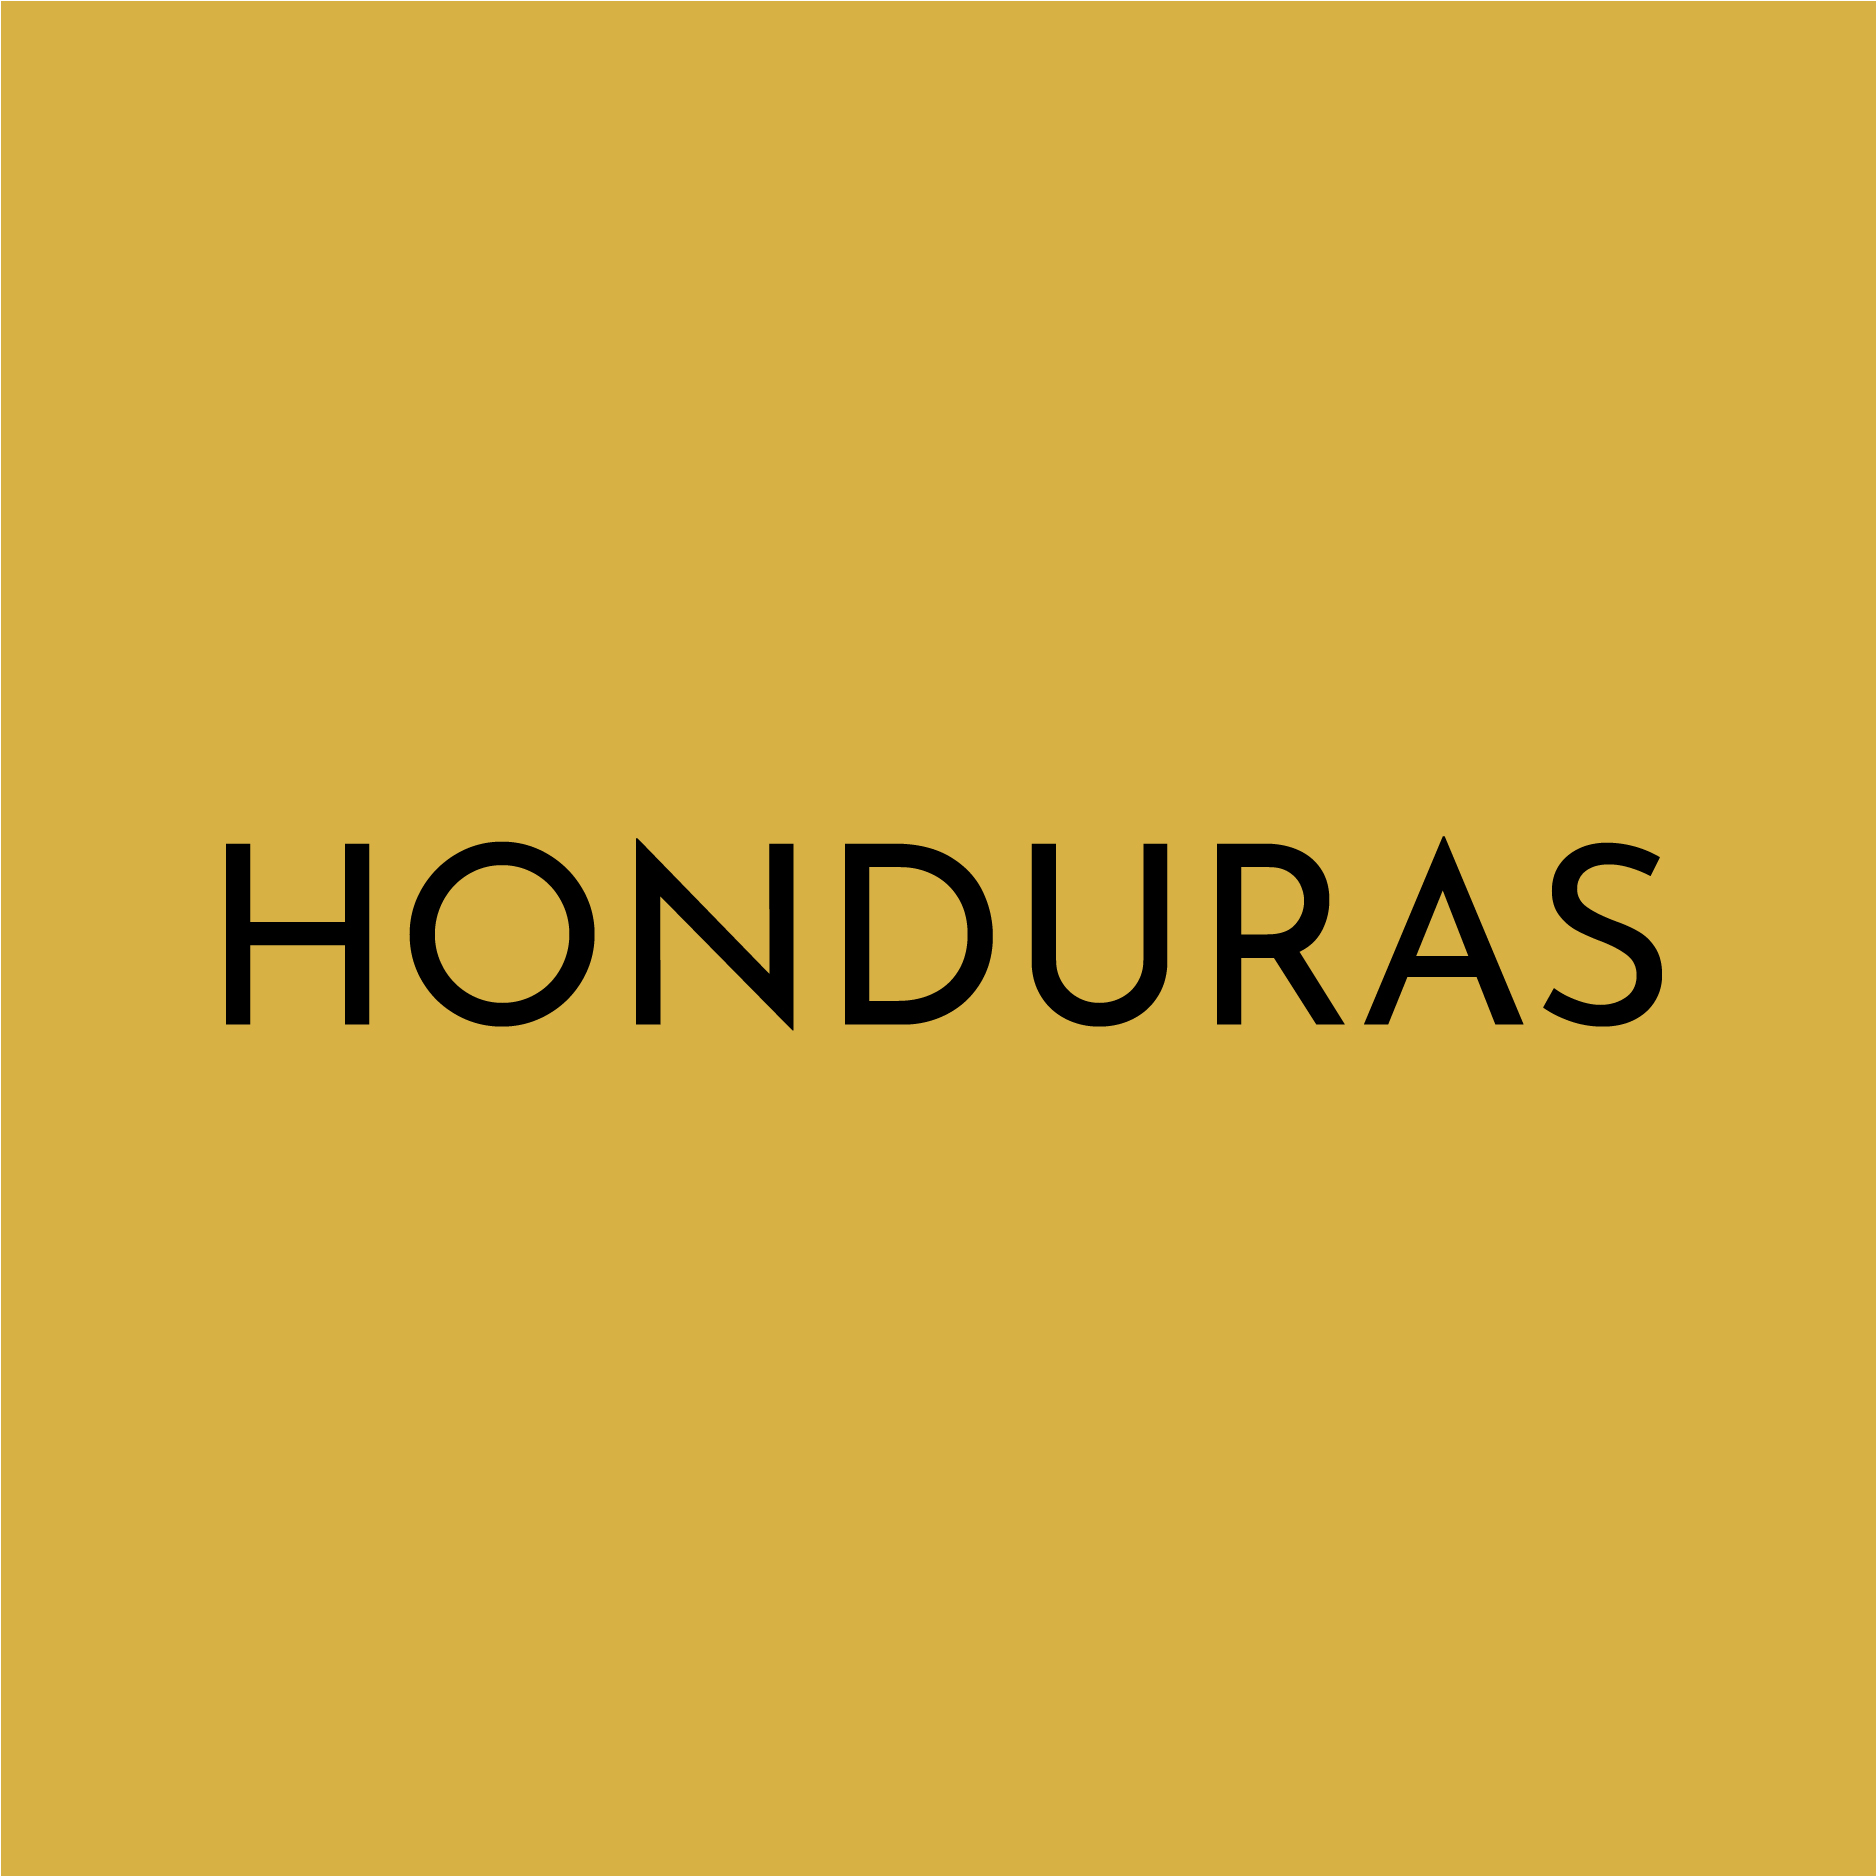 A solid yellow block contains the text “HONDURAS”